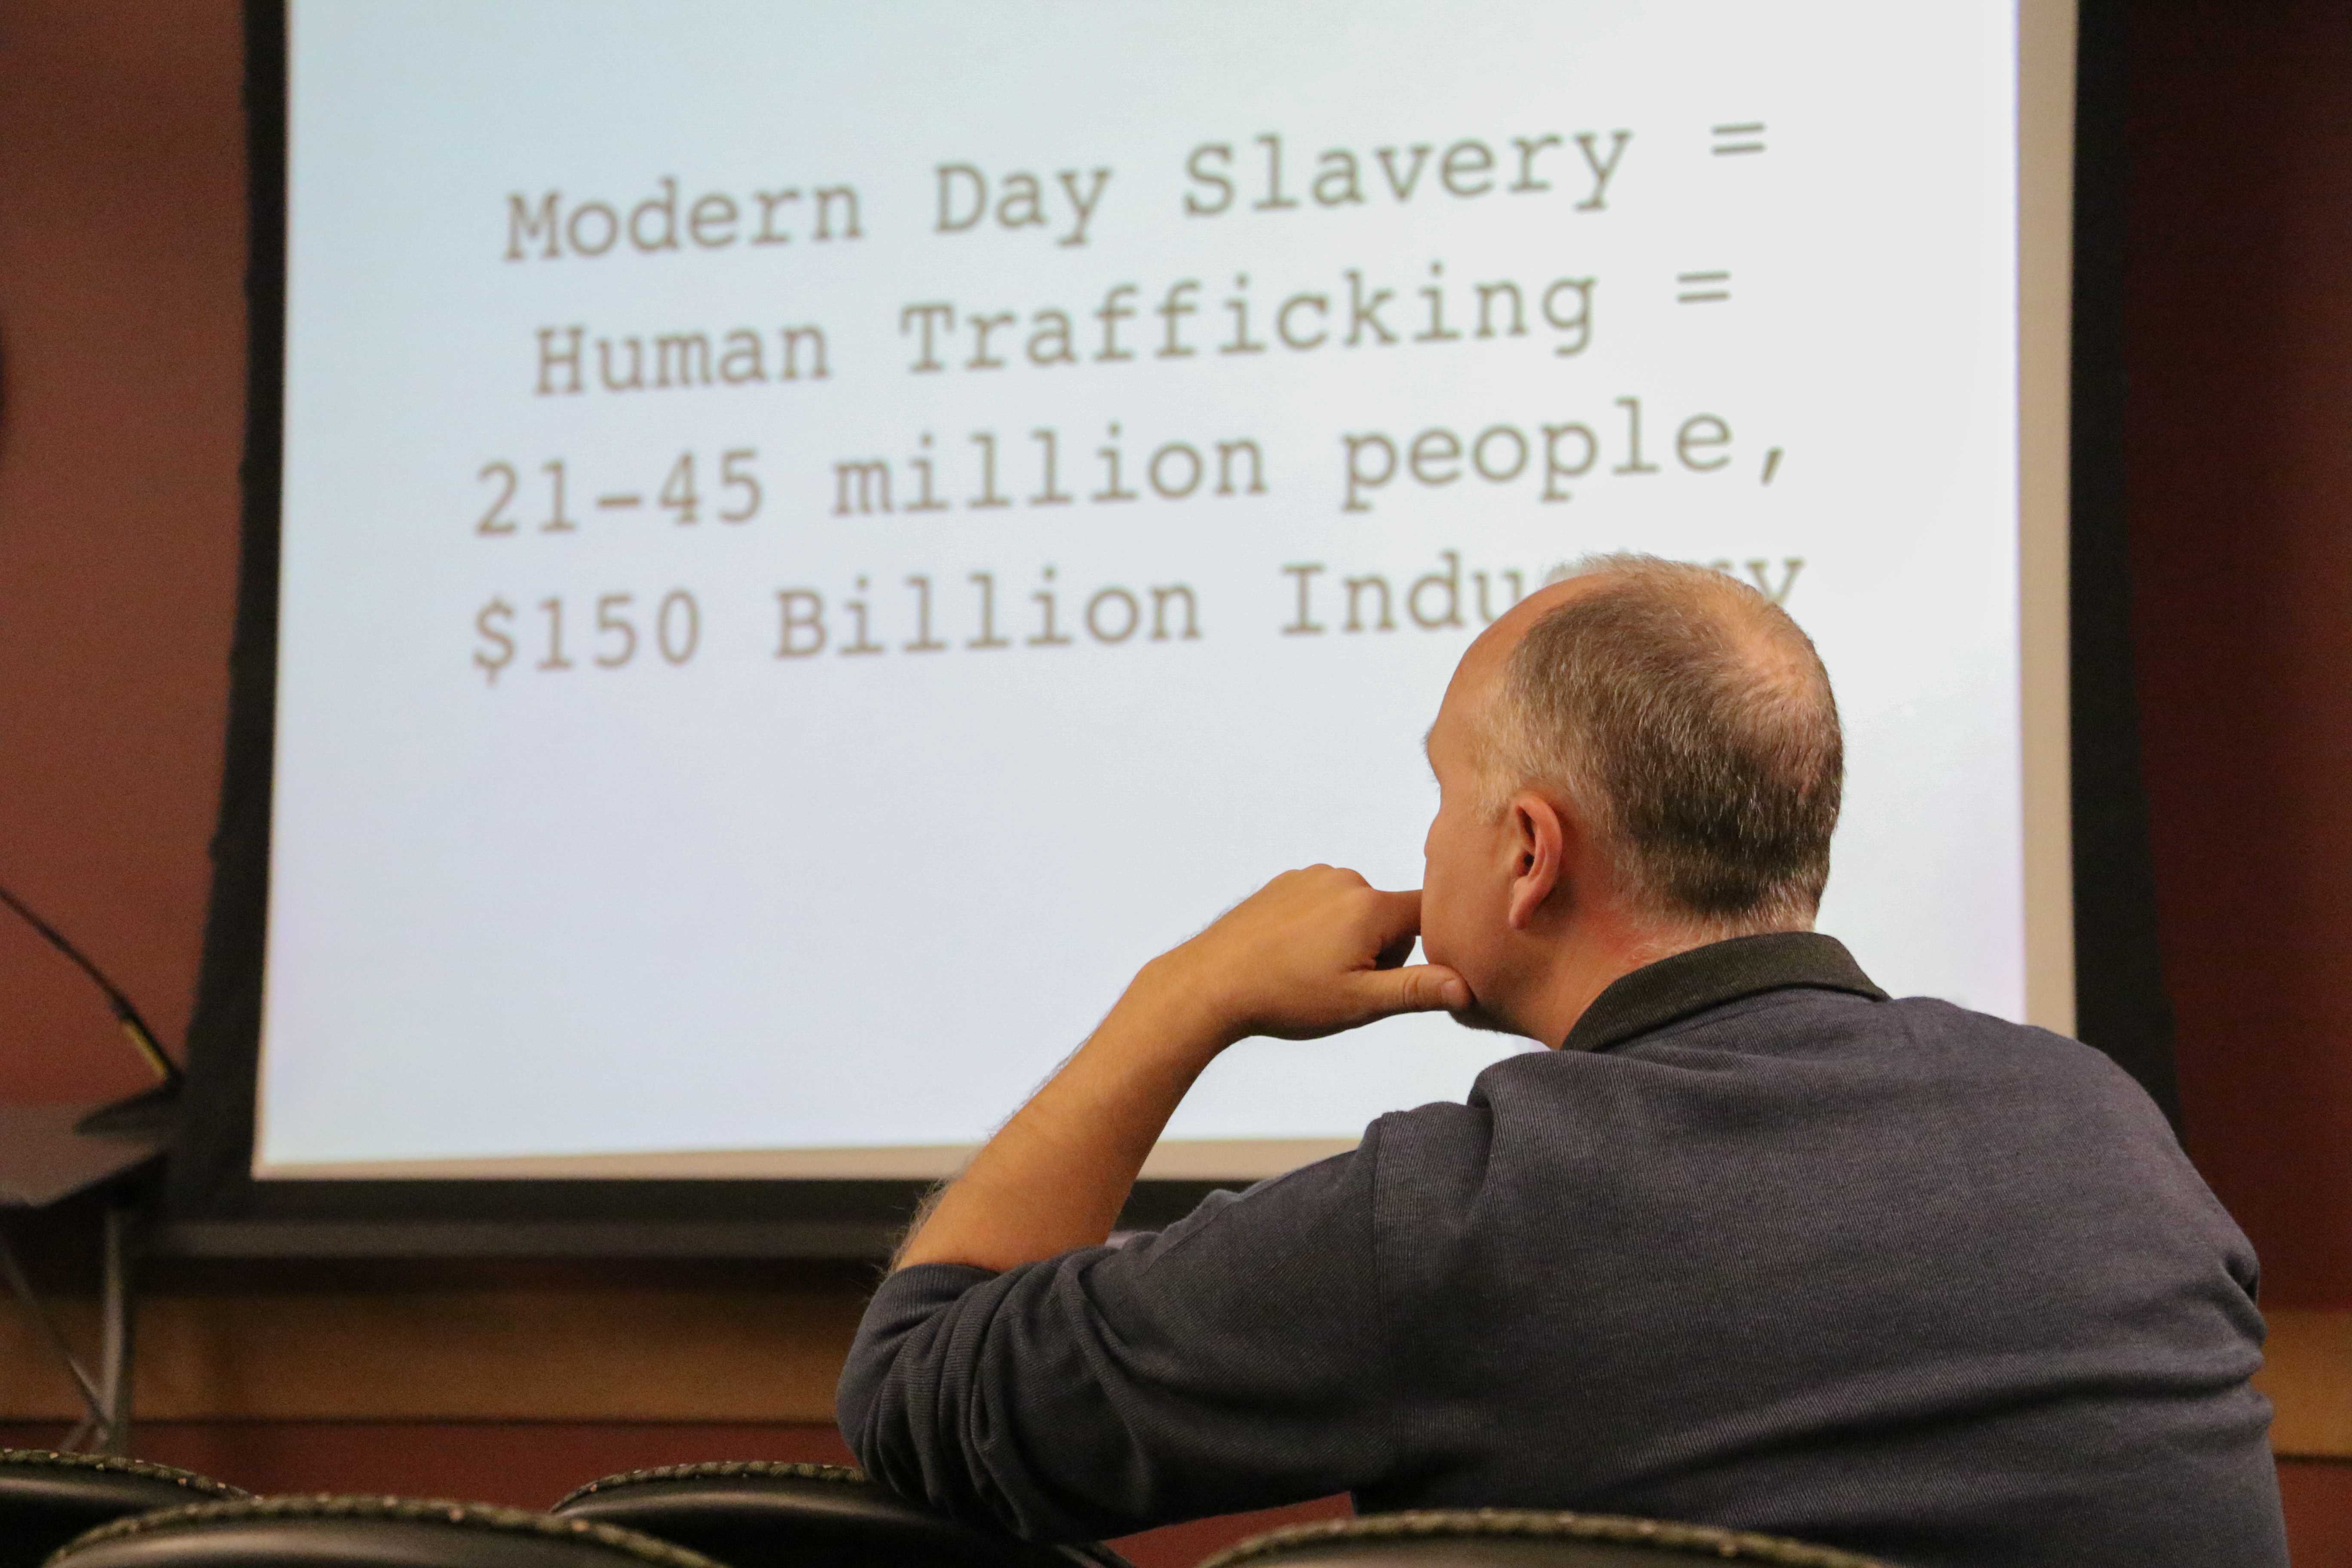 A man sits in front of a presentation on human trafficking. The slide behind him says 'Modern day slavery = Human trafficking = 21=45 million people, $150 billion industry.'